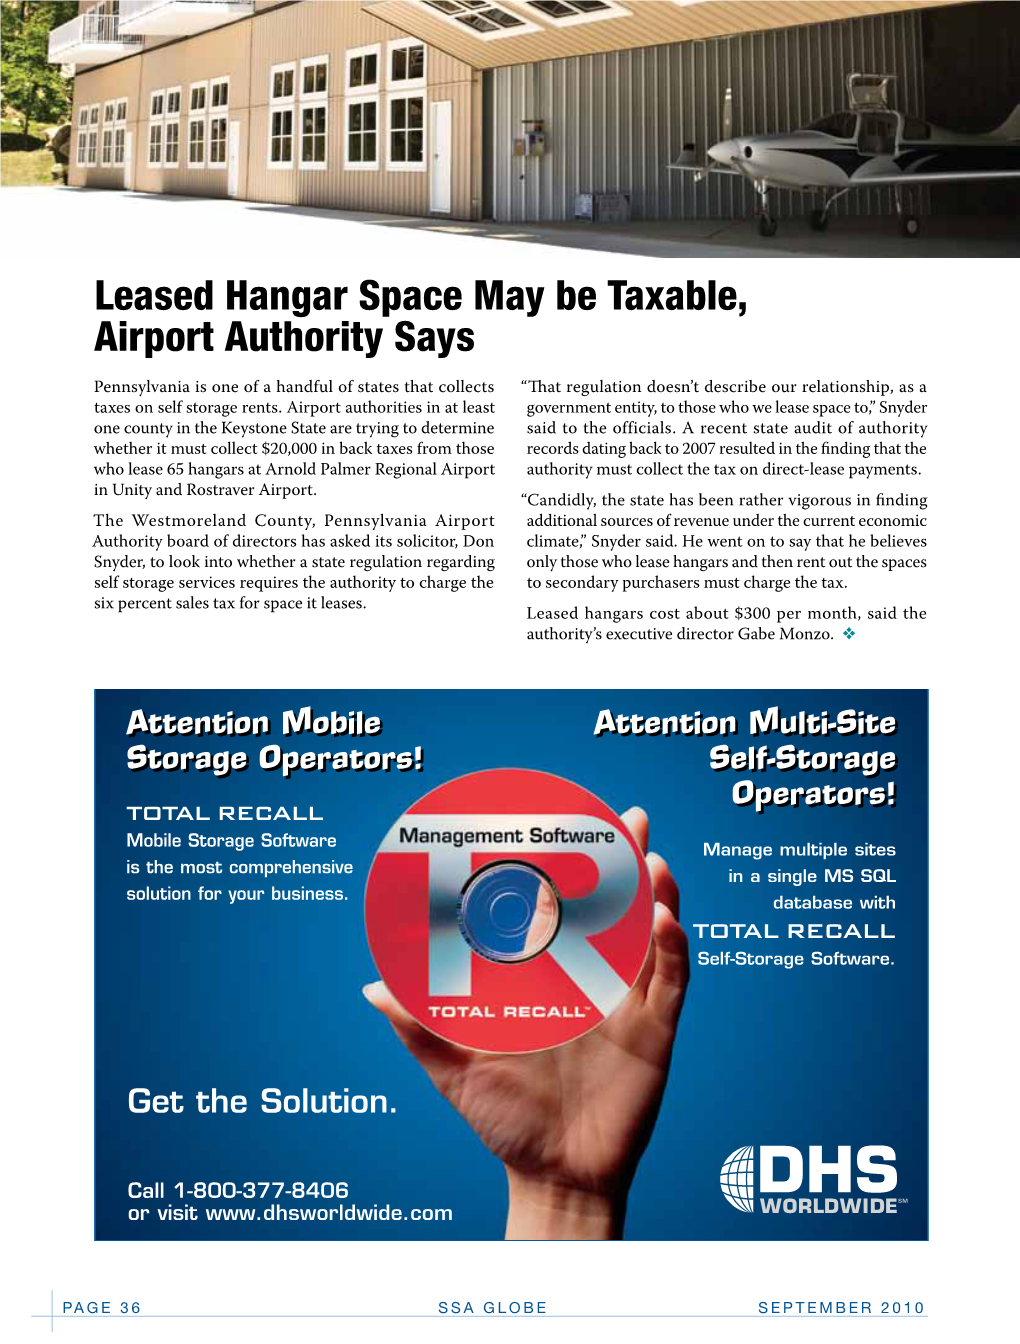 Leased Hangar Space May Be Taxable, Airport Authority Says